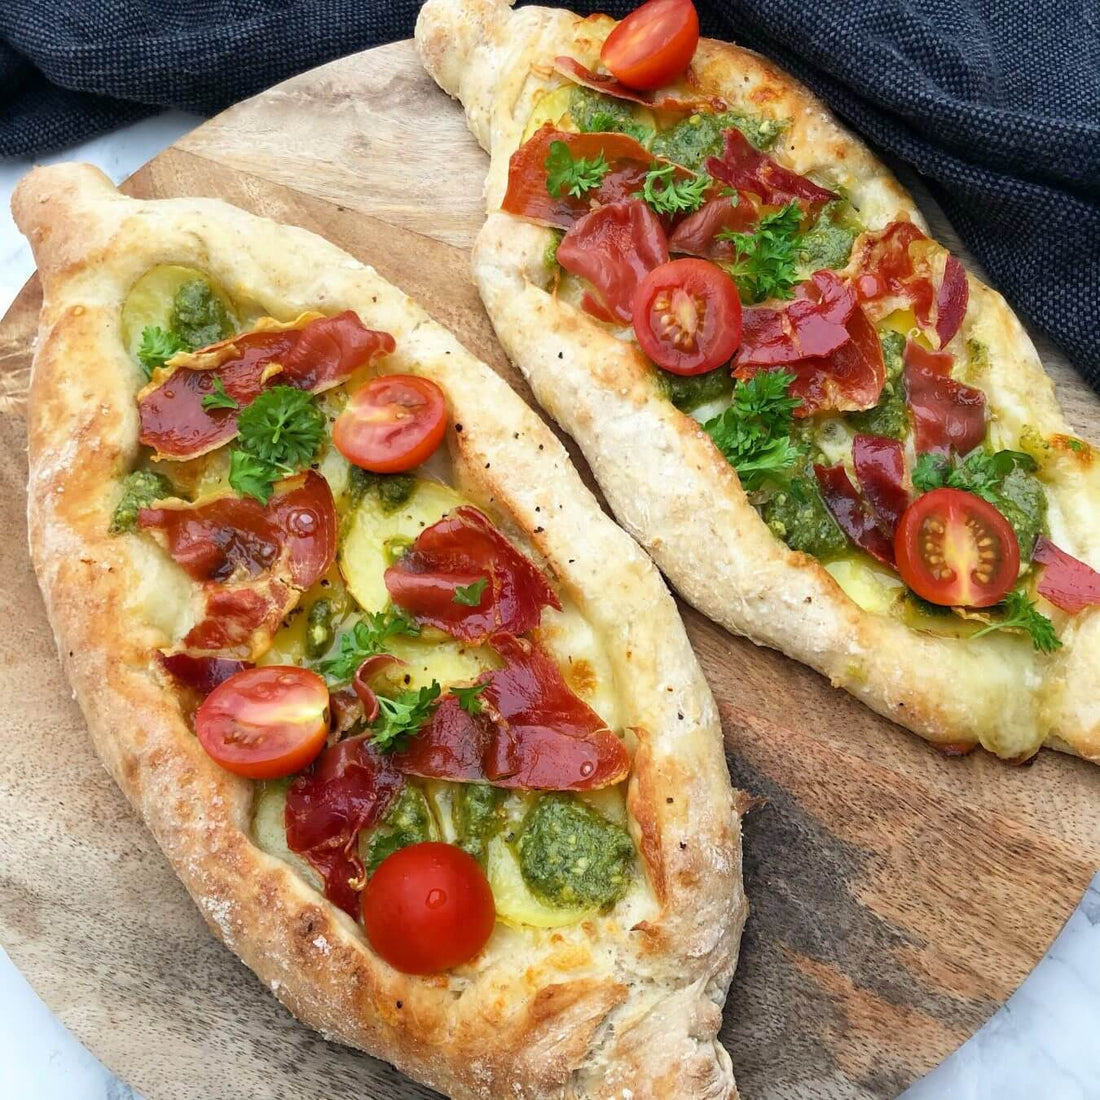 Peinirli vs. pizza? In Greece their version of pizza is called Peinirli. It is a boat shaped pizza that is easy to make and very delicious